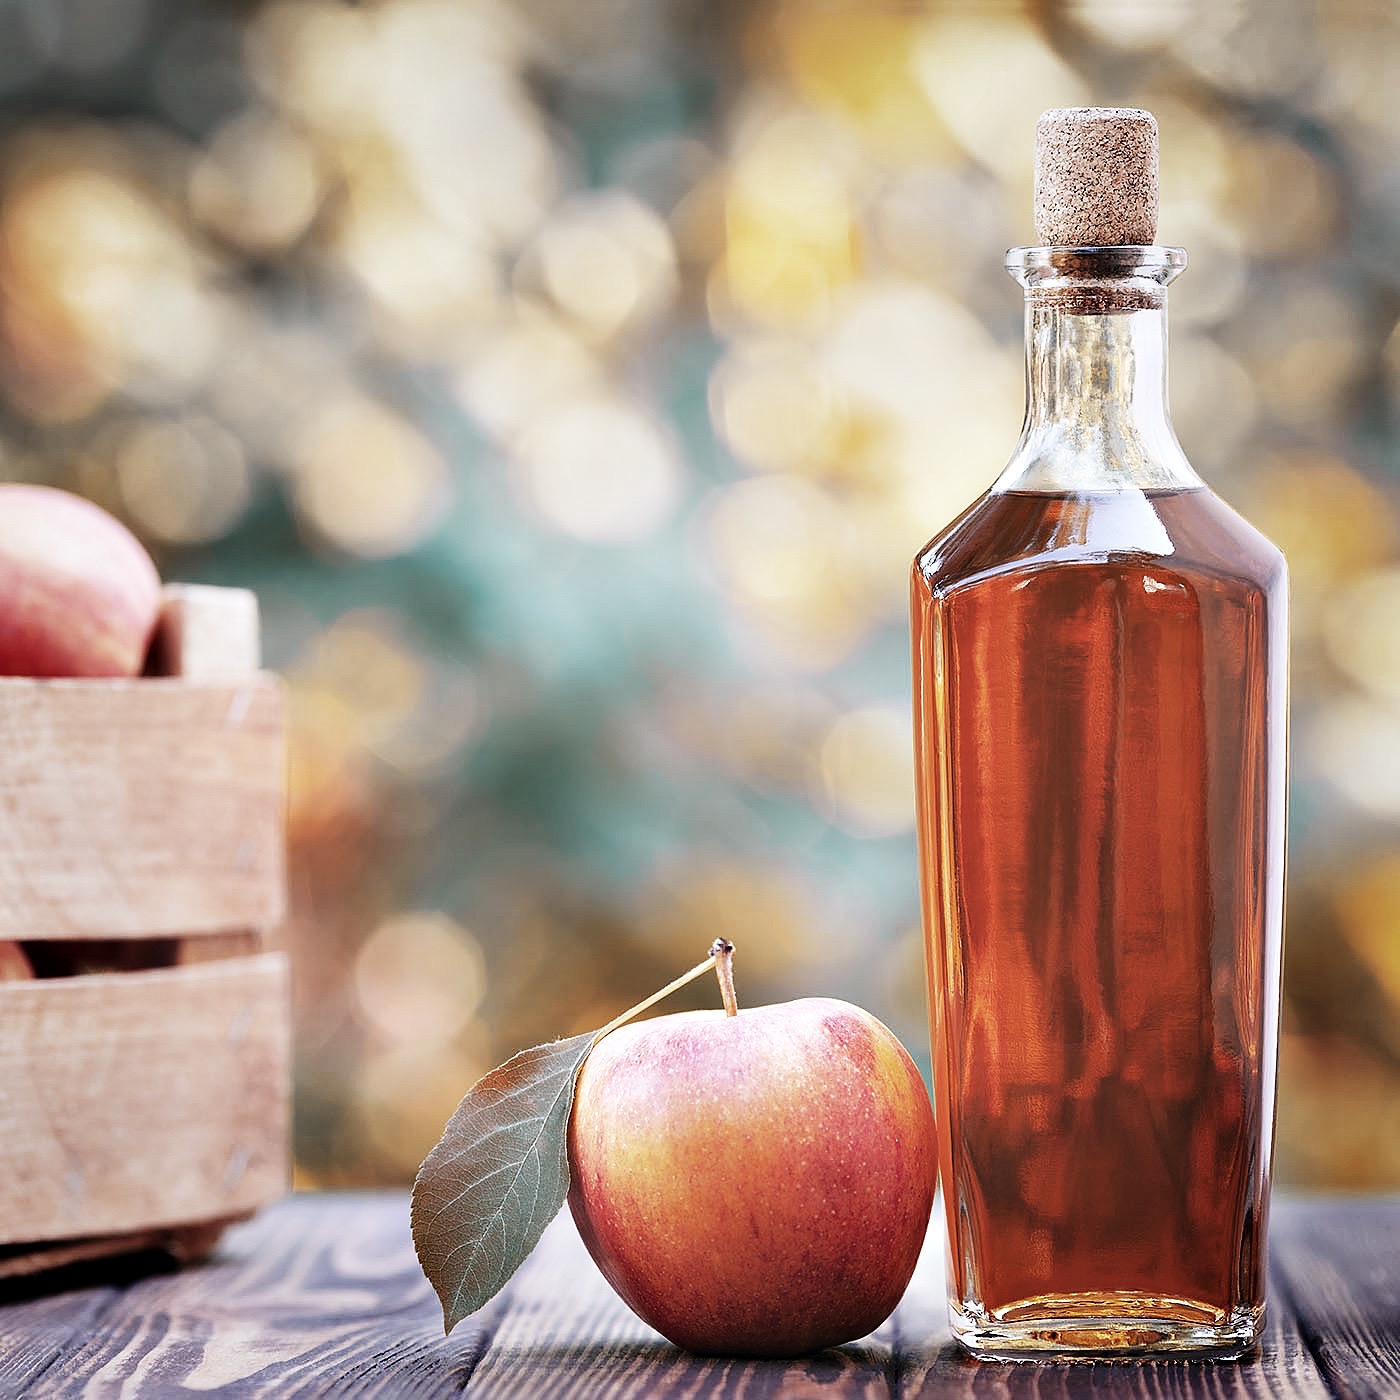 apple cider or vinegar in glass bottle and ripe fresh apples on wooden table outdoors